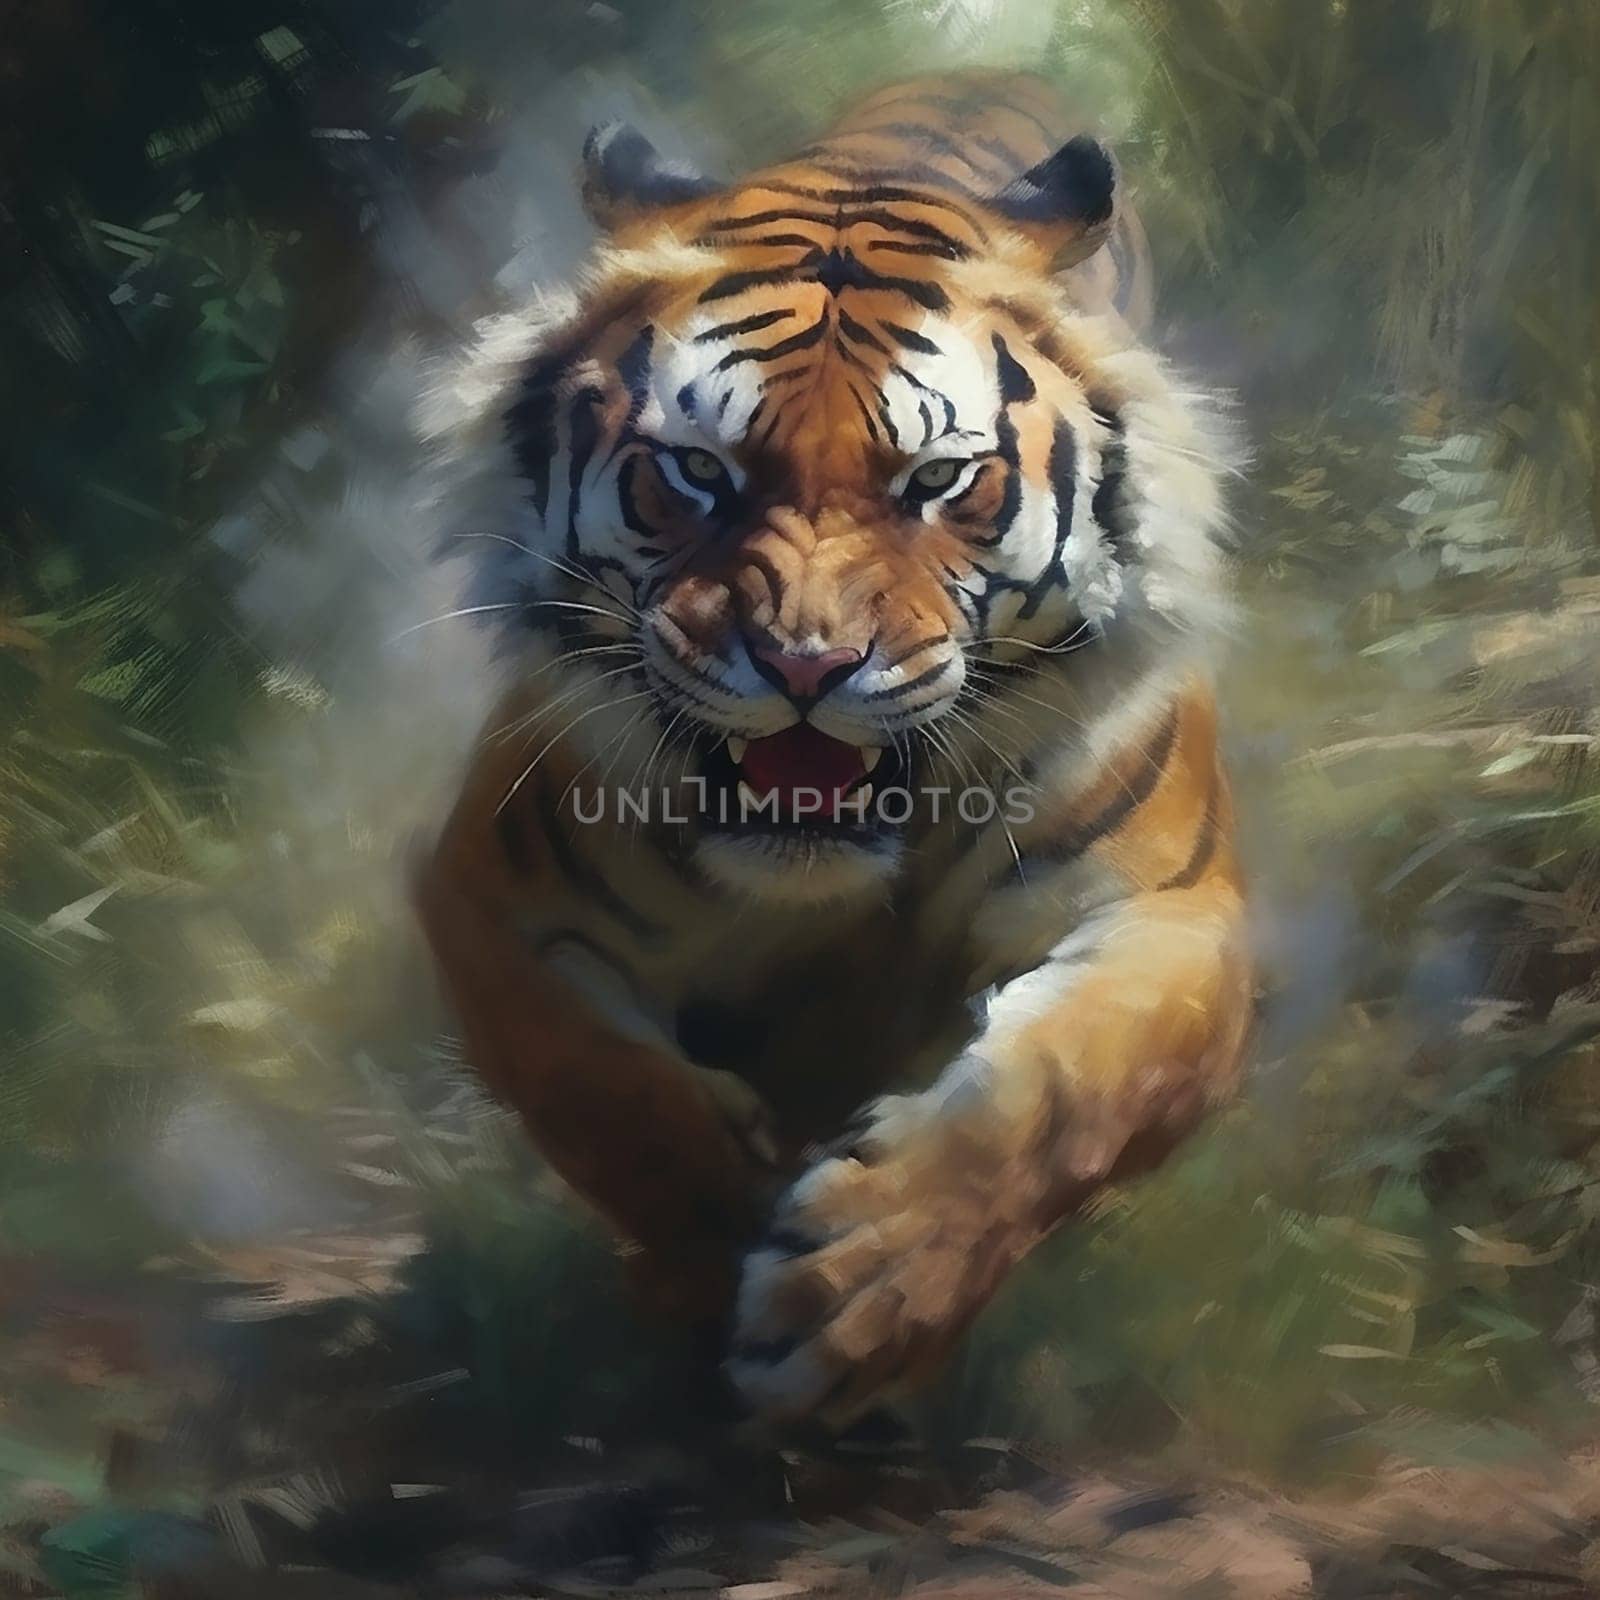 A paint wild tiger running, hunting, dynamic photo